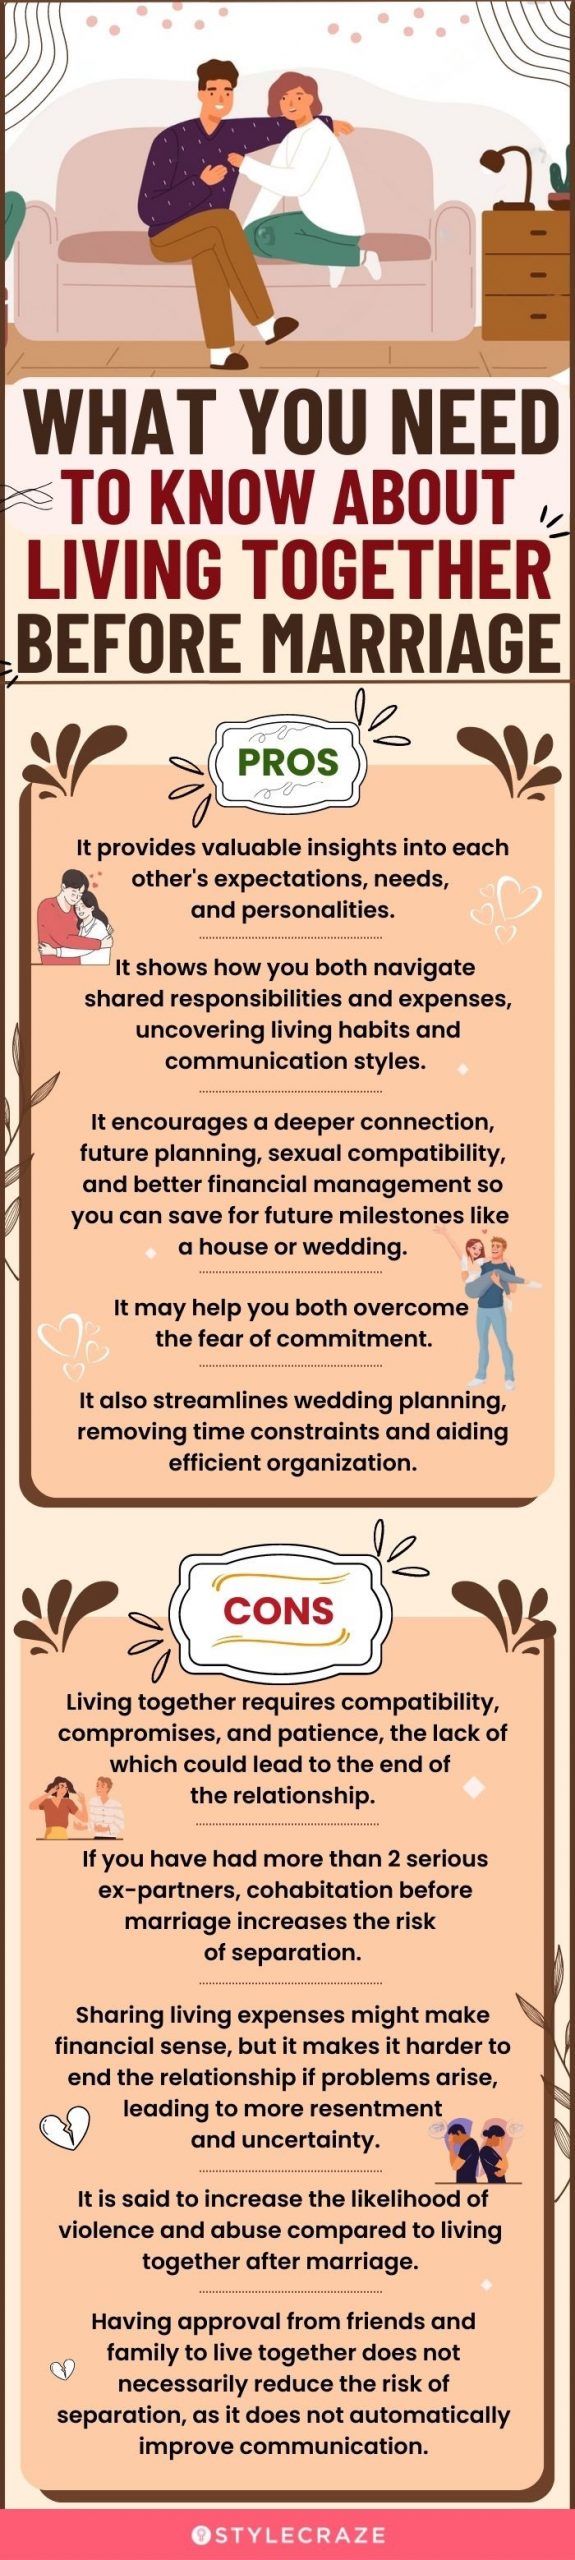 what you need to know about living togerher before marriage (infographic)